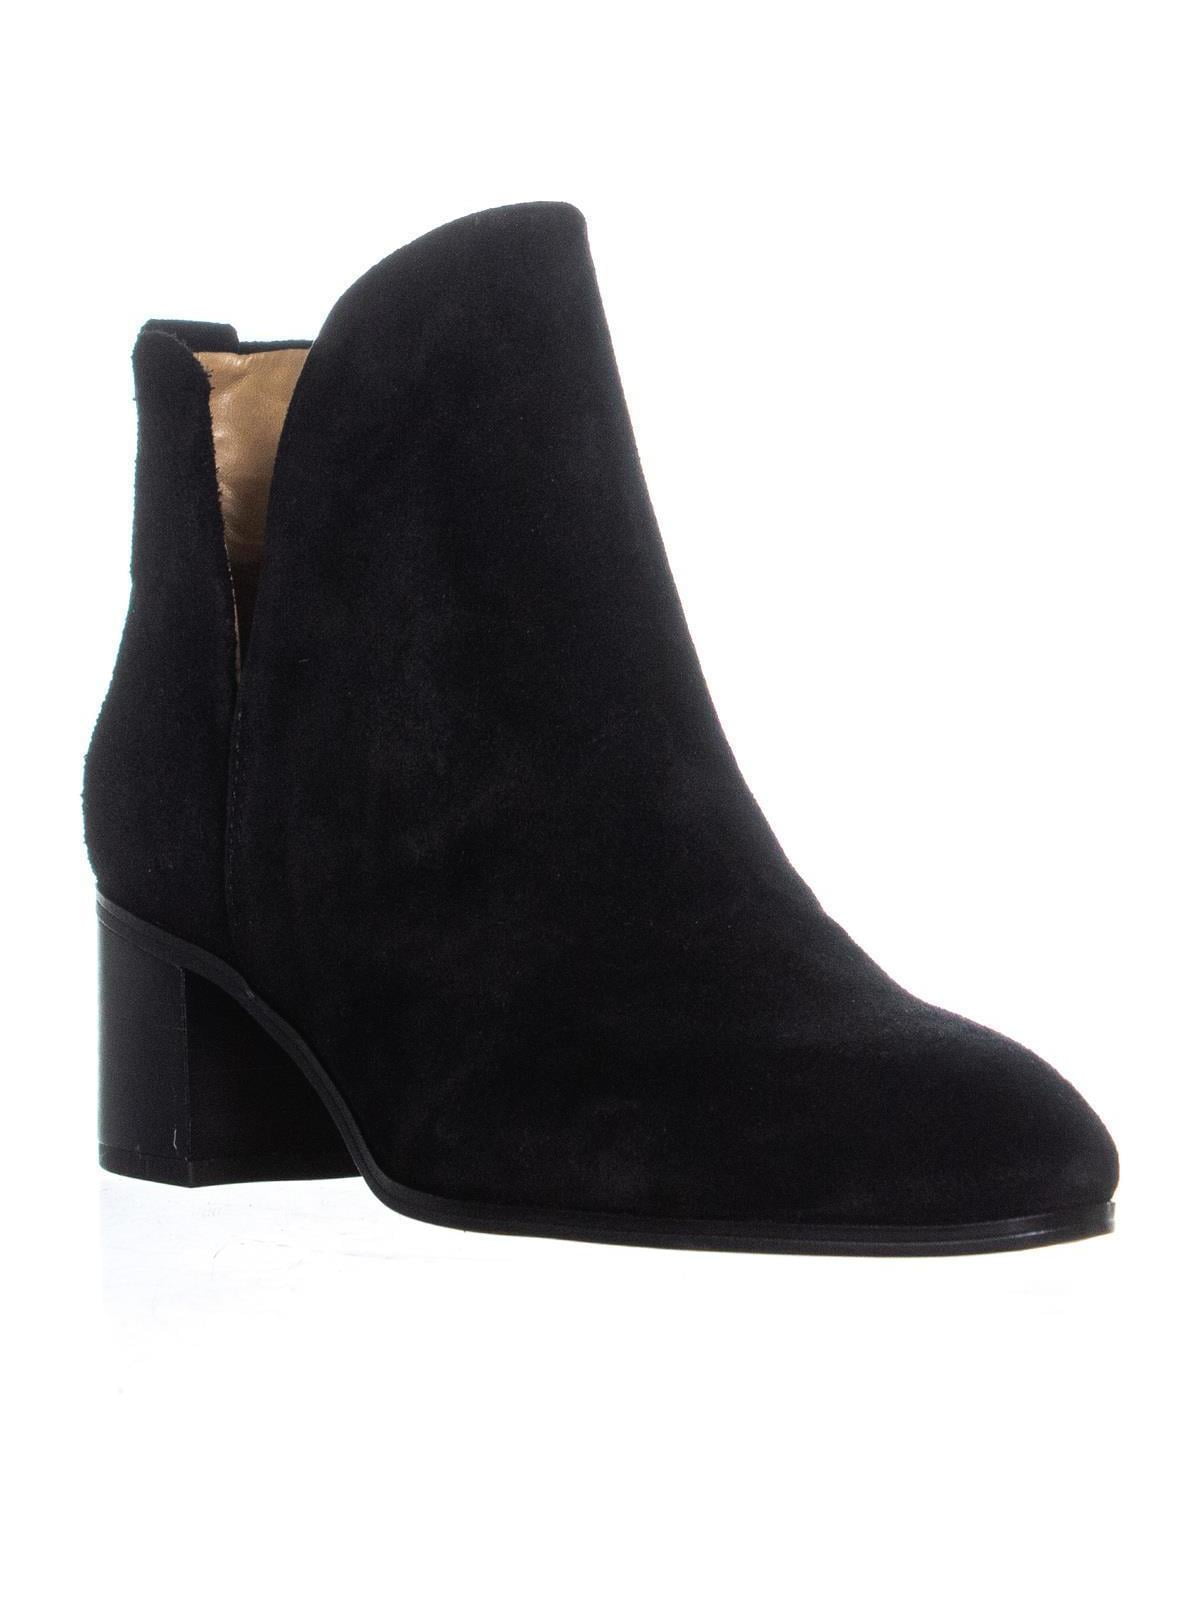 franco sarto reeve ankle booties